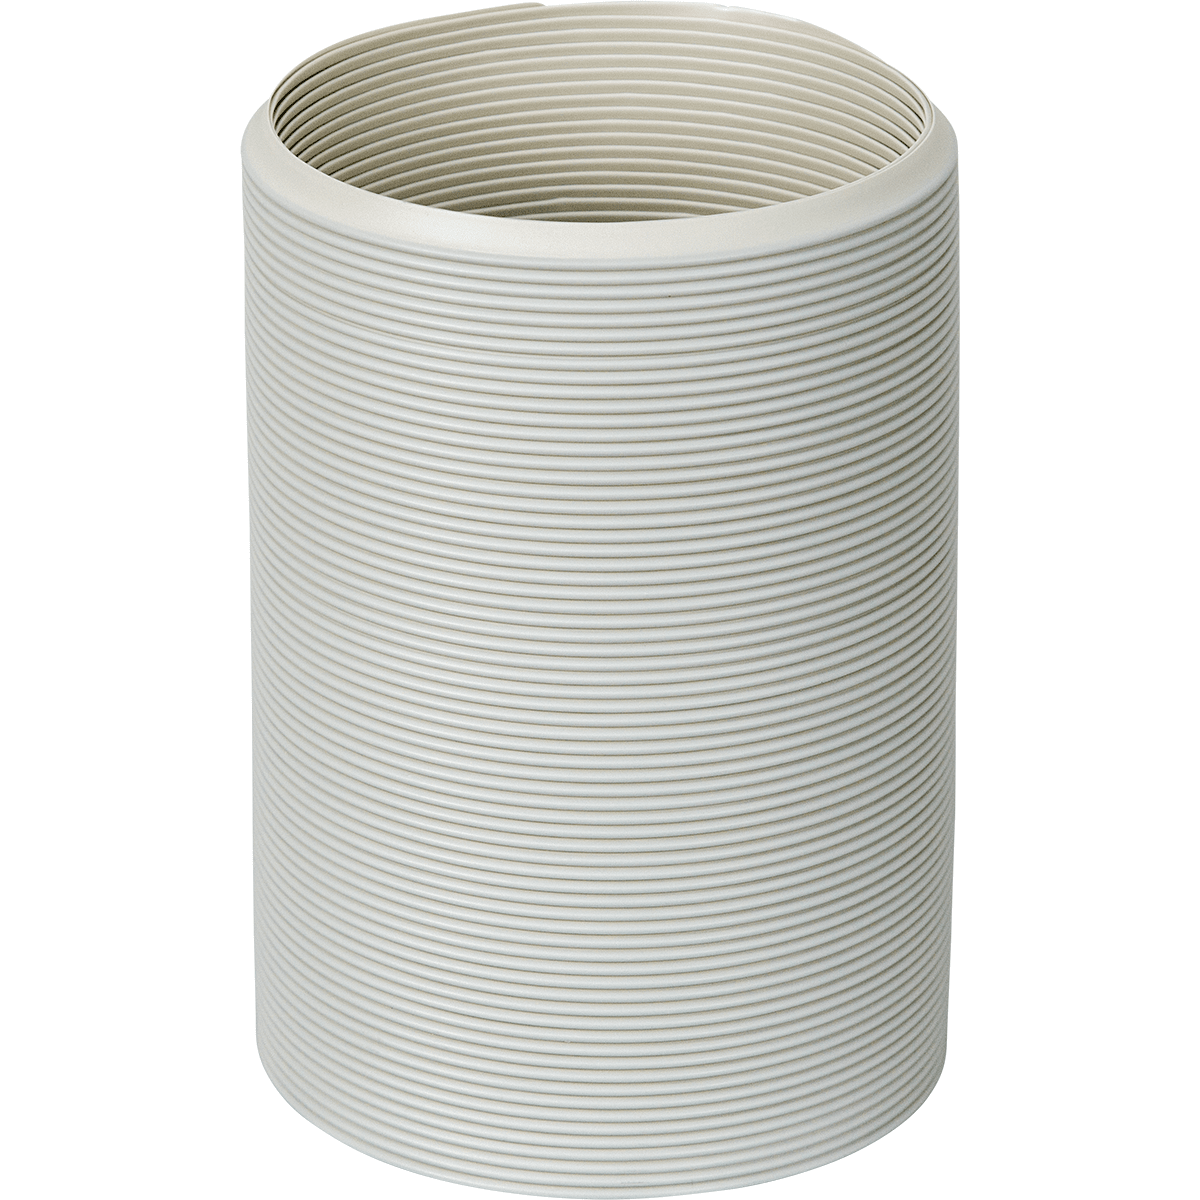 Honeywell Replacement High Compressed Exhaust Hose for MN1/MN4 Series Portable AC (A6200-530-BS)